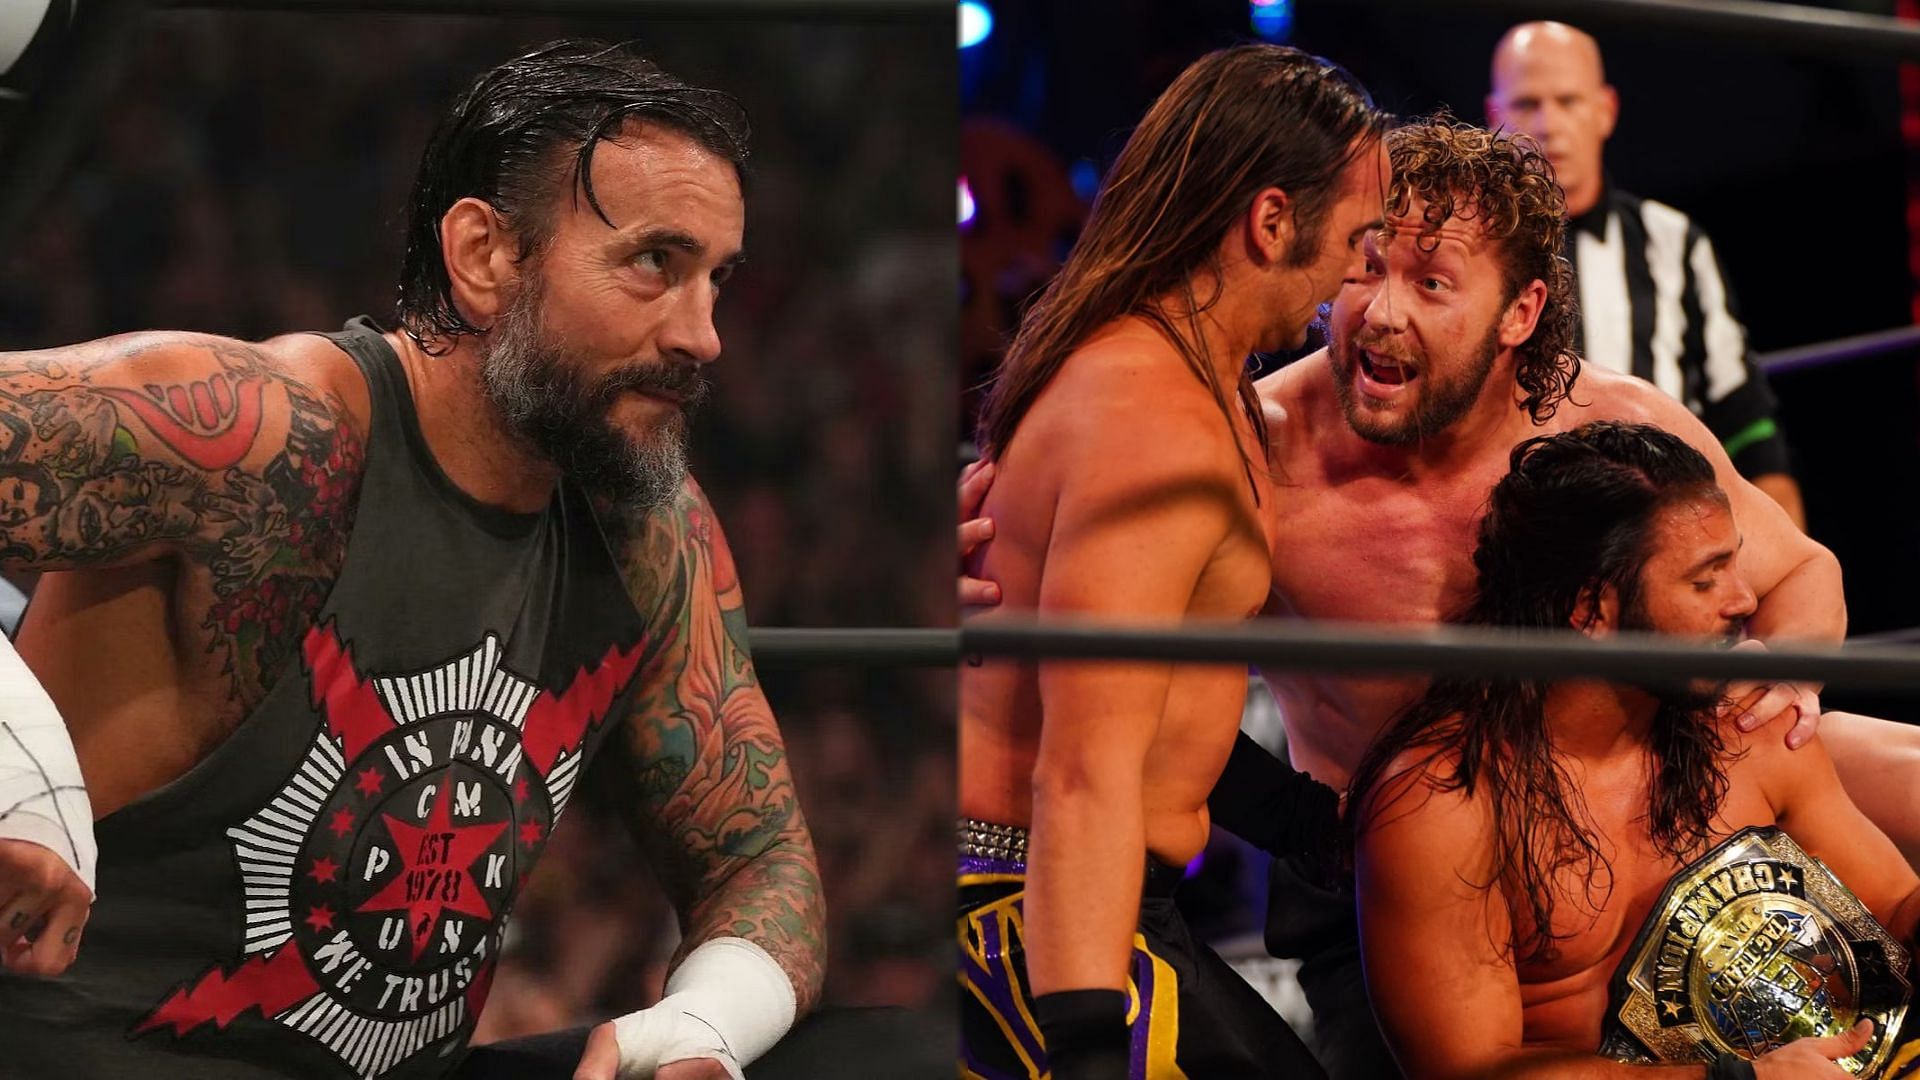 Could things have been sorted between CM Punk and The Elite?